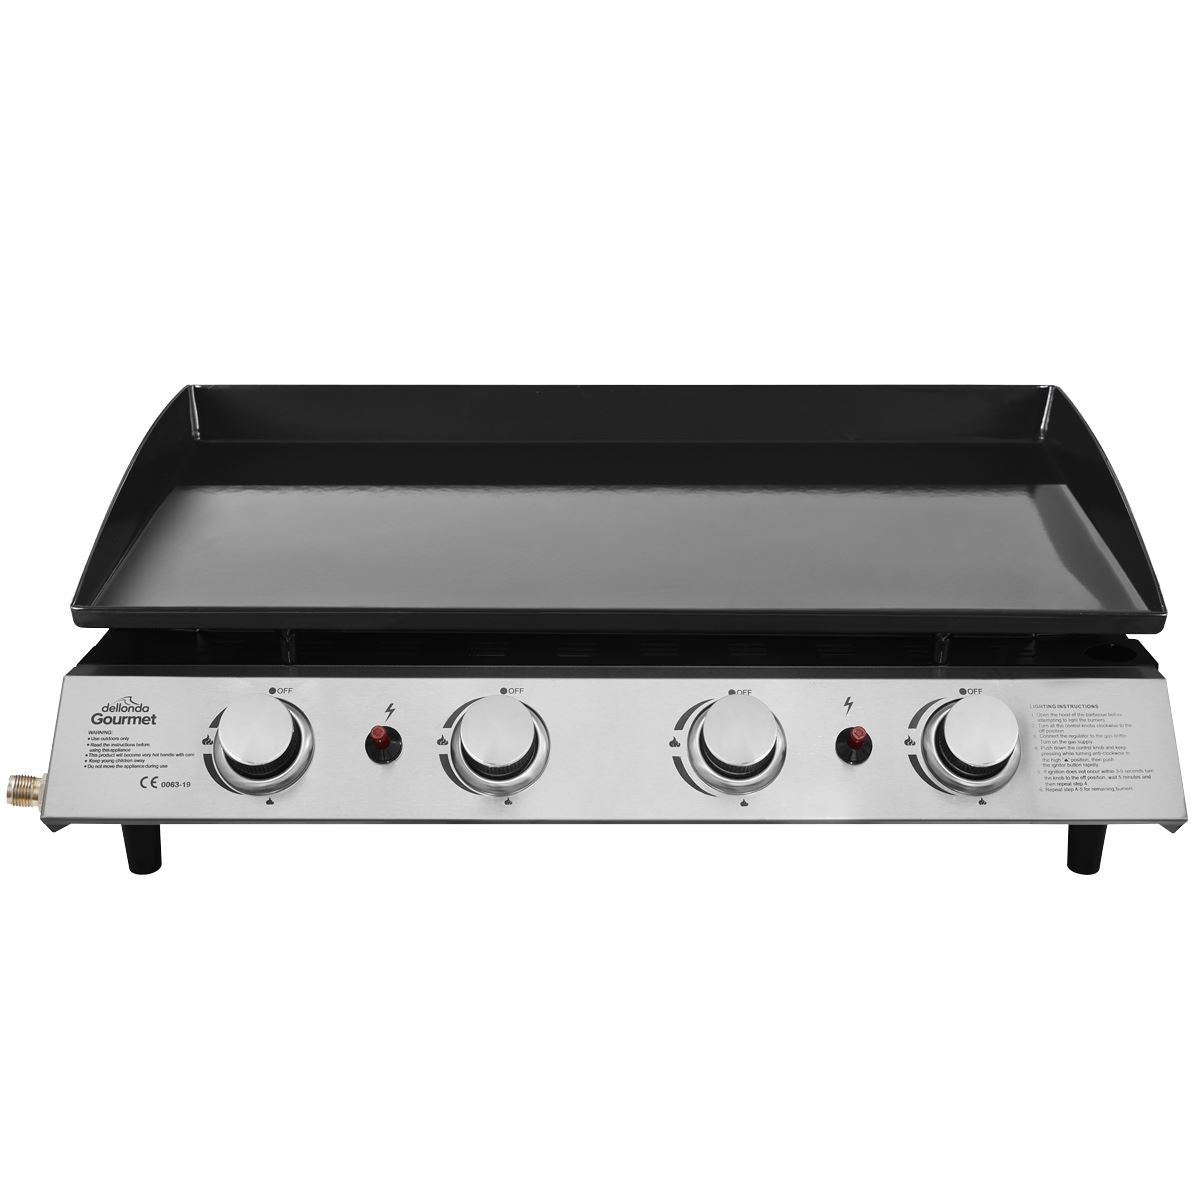 Dellonda 4 Burner Portable Gas Plancha 10kW BBQ Griddle, Stainless Steel